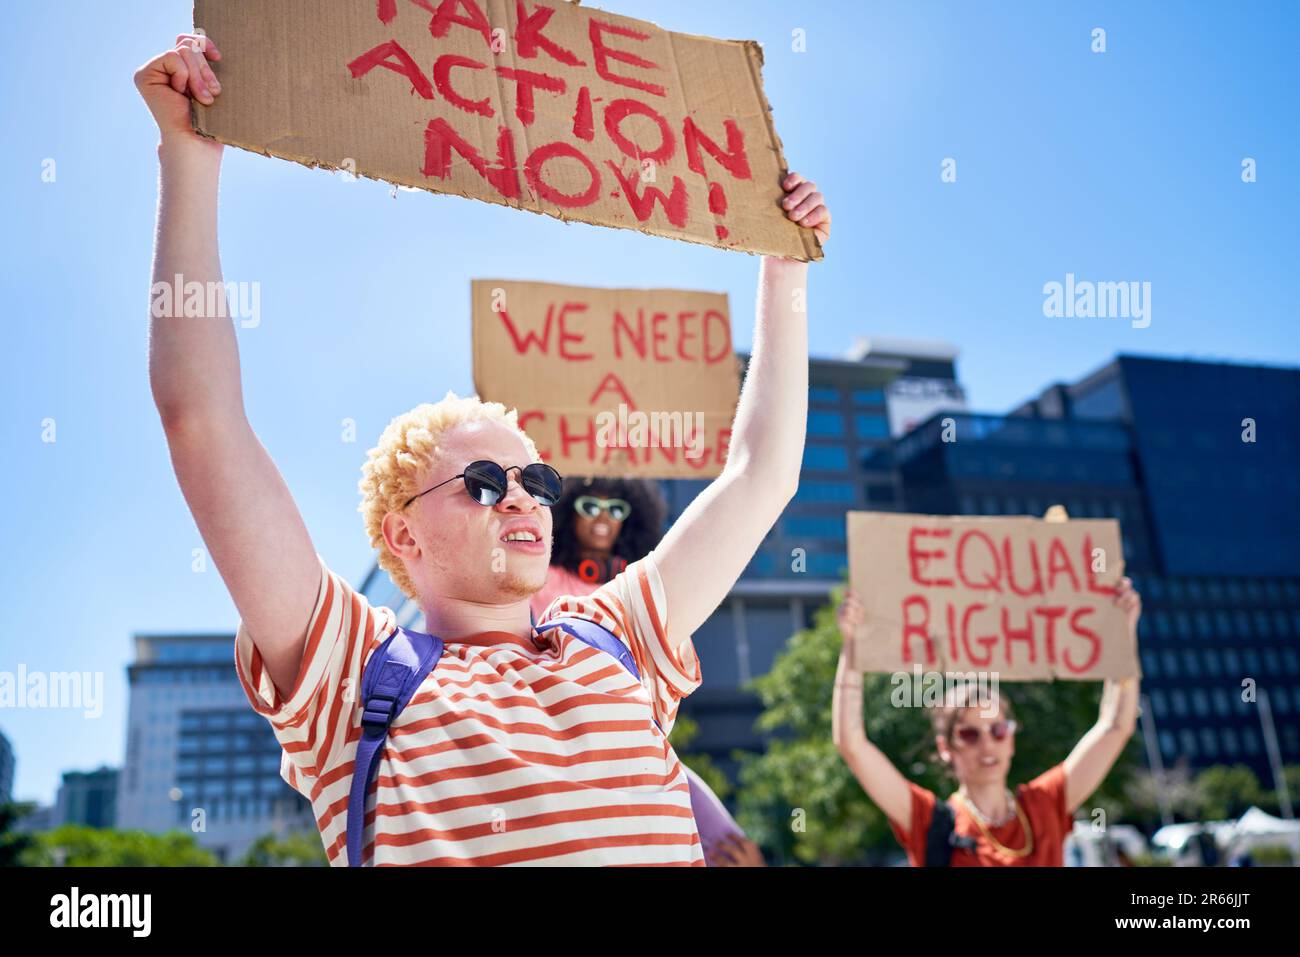 Young protesters holding equal rights signs in sunny city Stock Photo